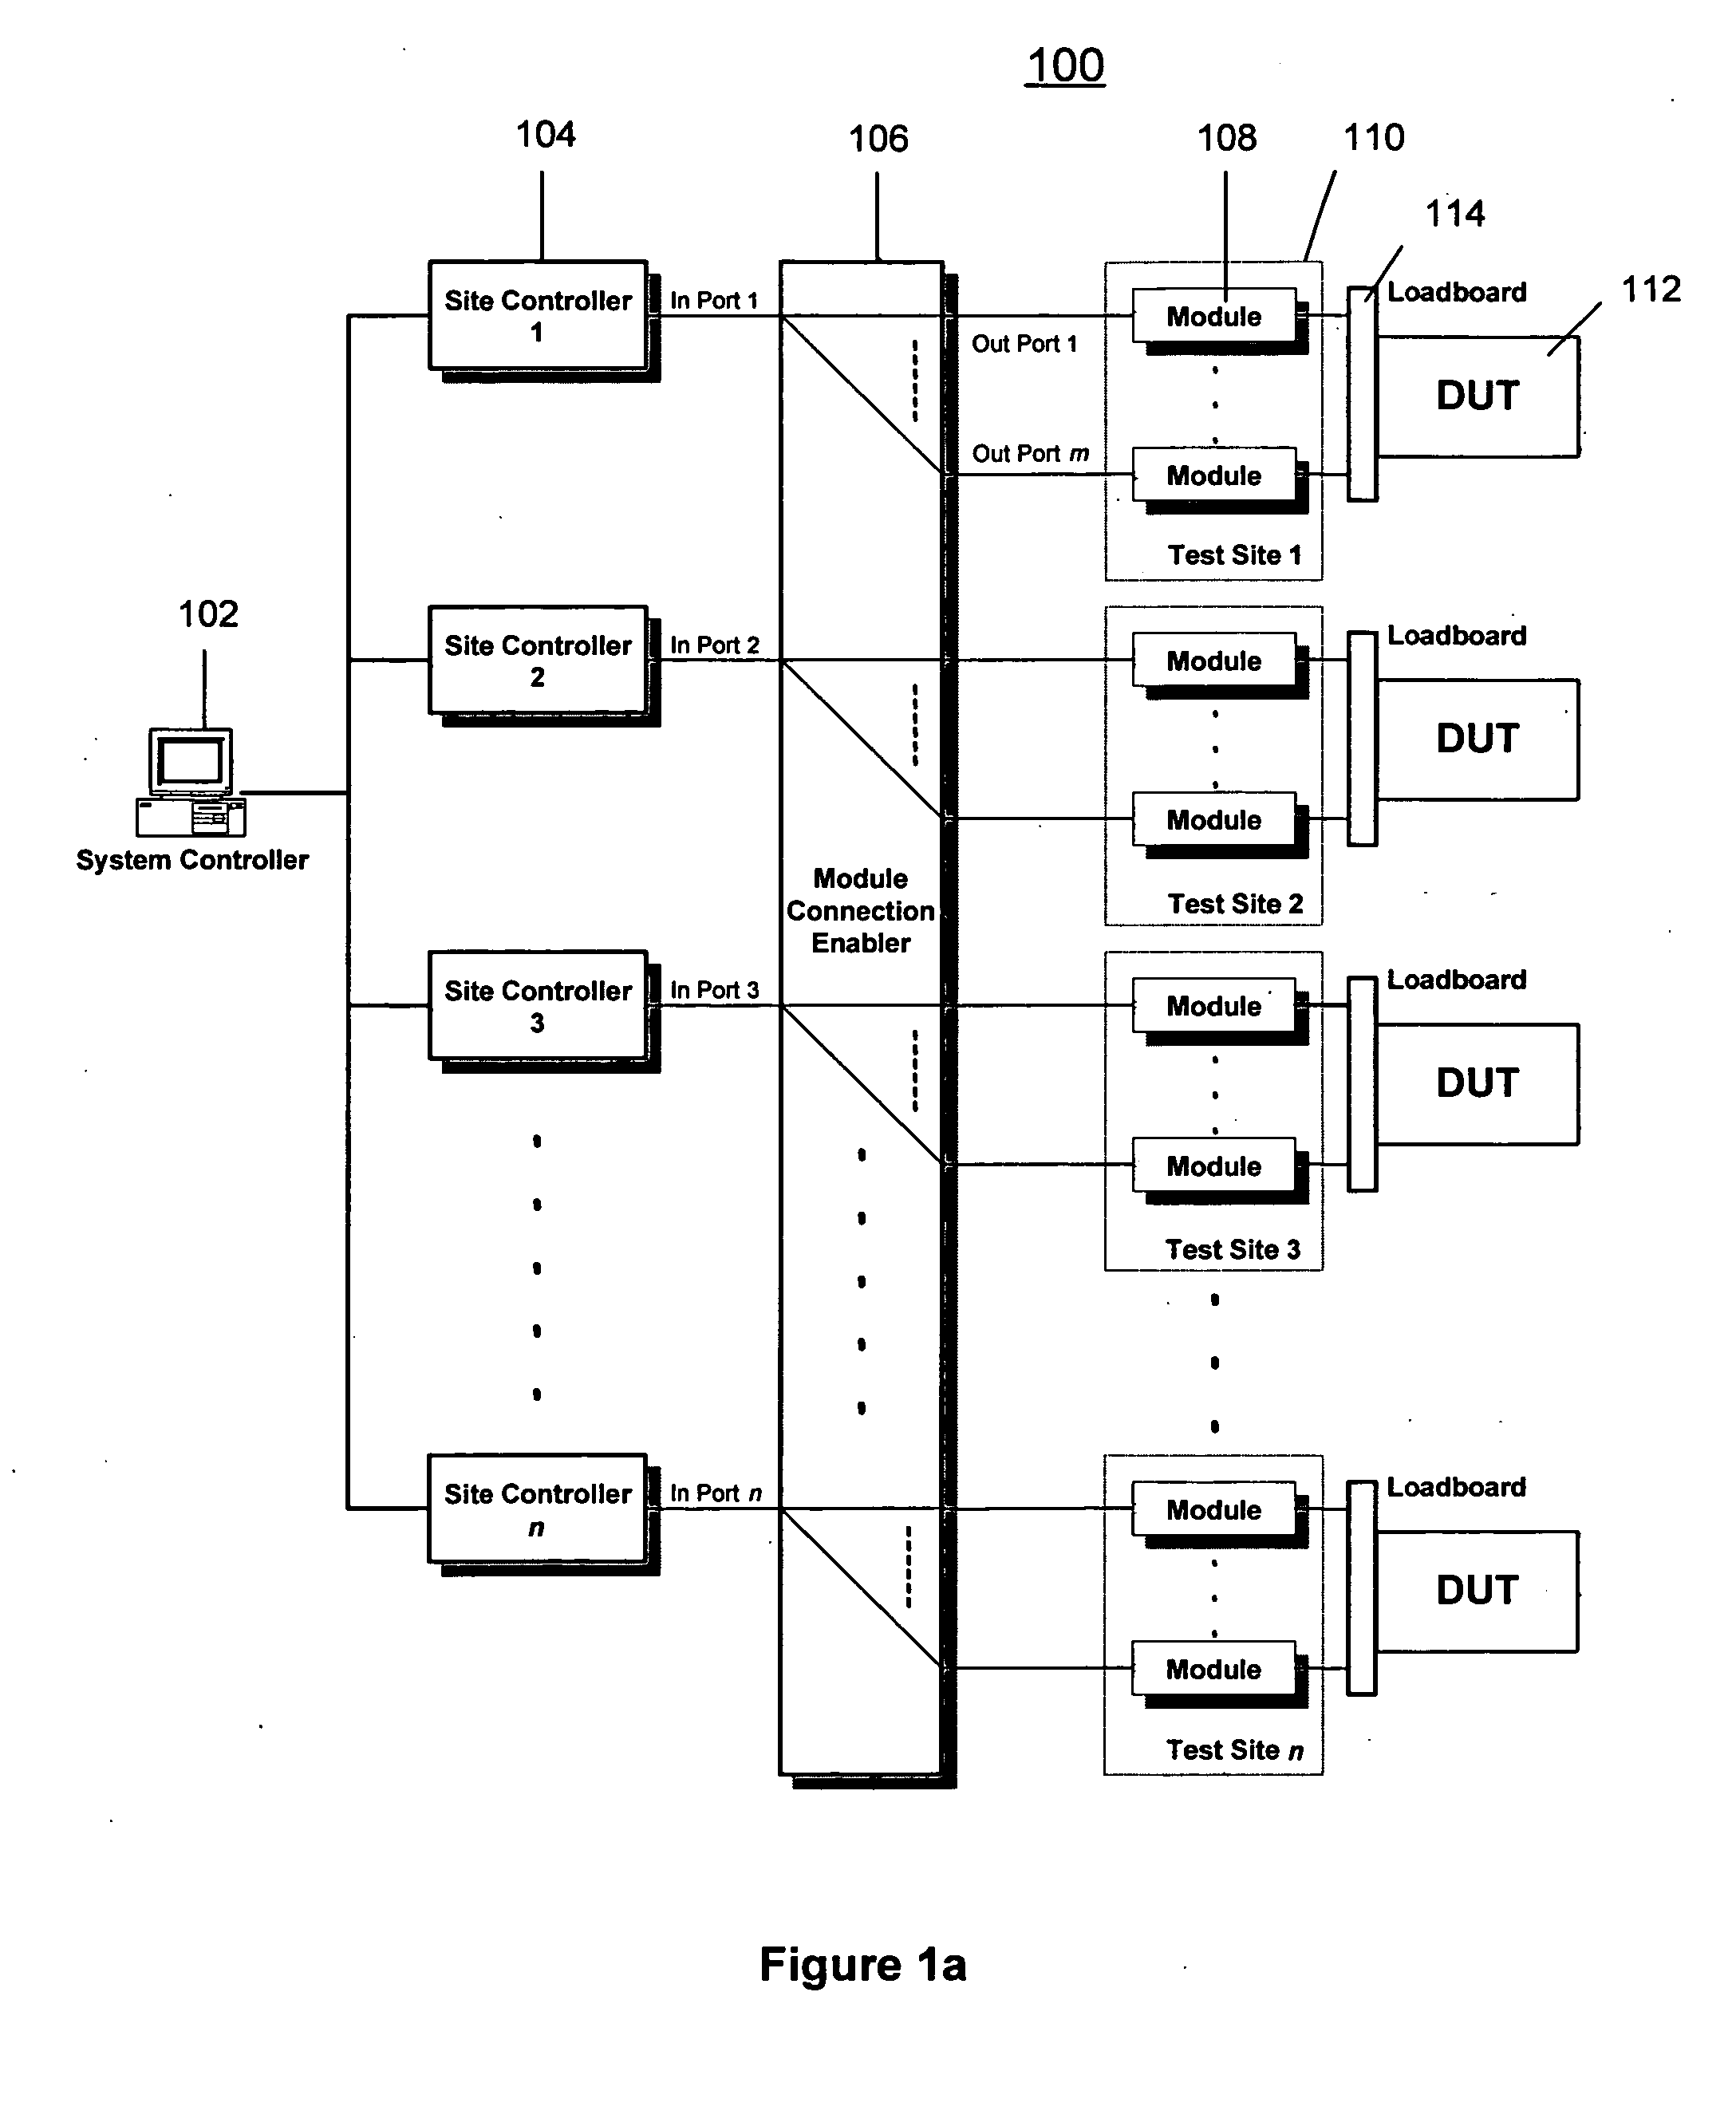 Method and system for performing installation and configuration management of tester instrument modules